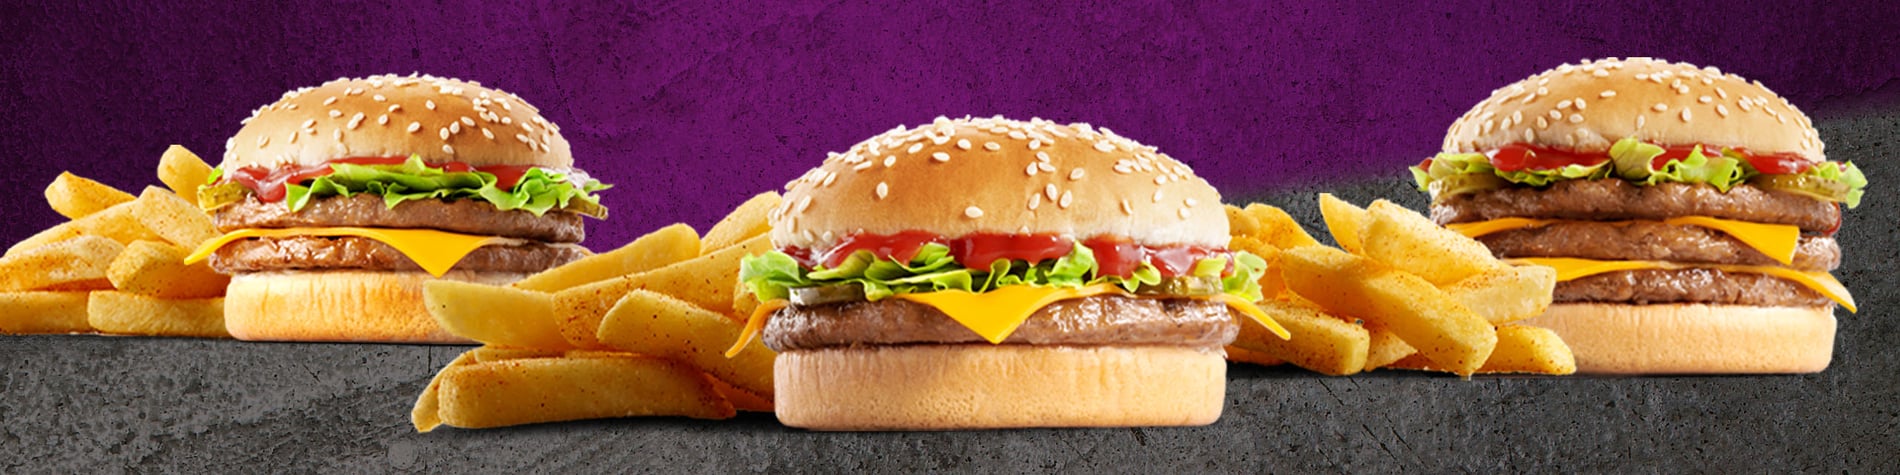 The Single, double and triple Get Real Cheese Burgers meals placed on a grey surface with a purple background.